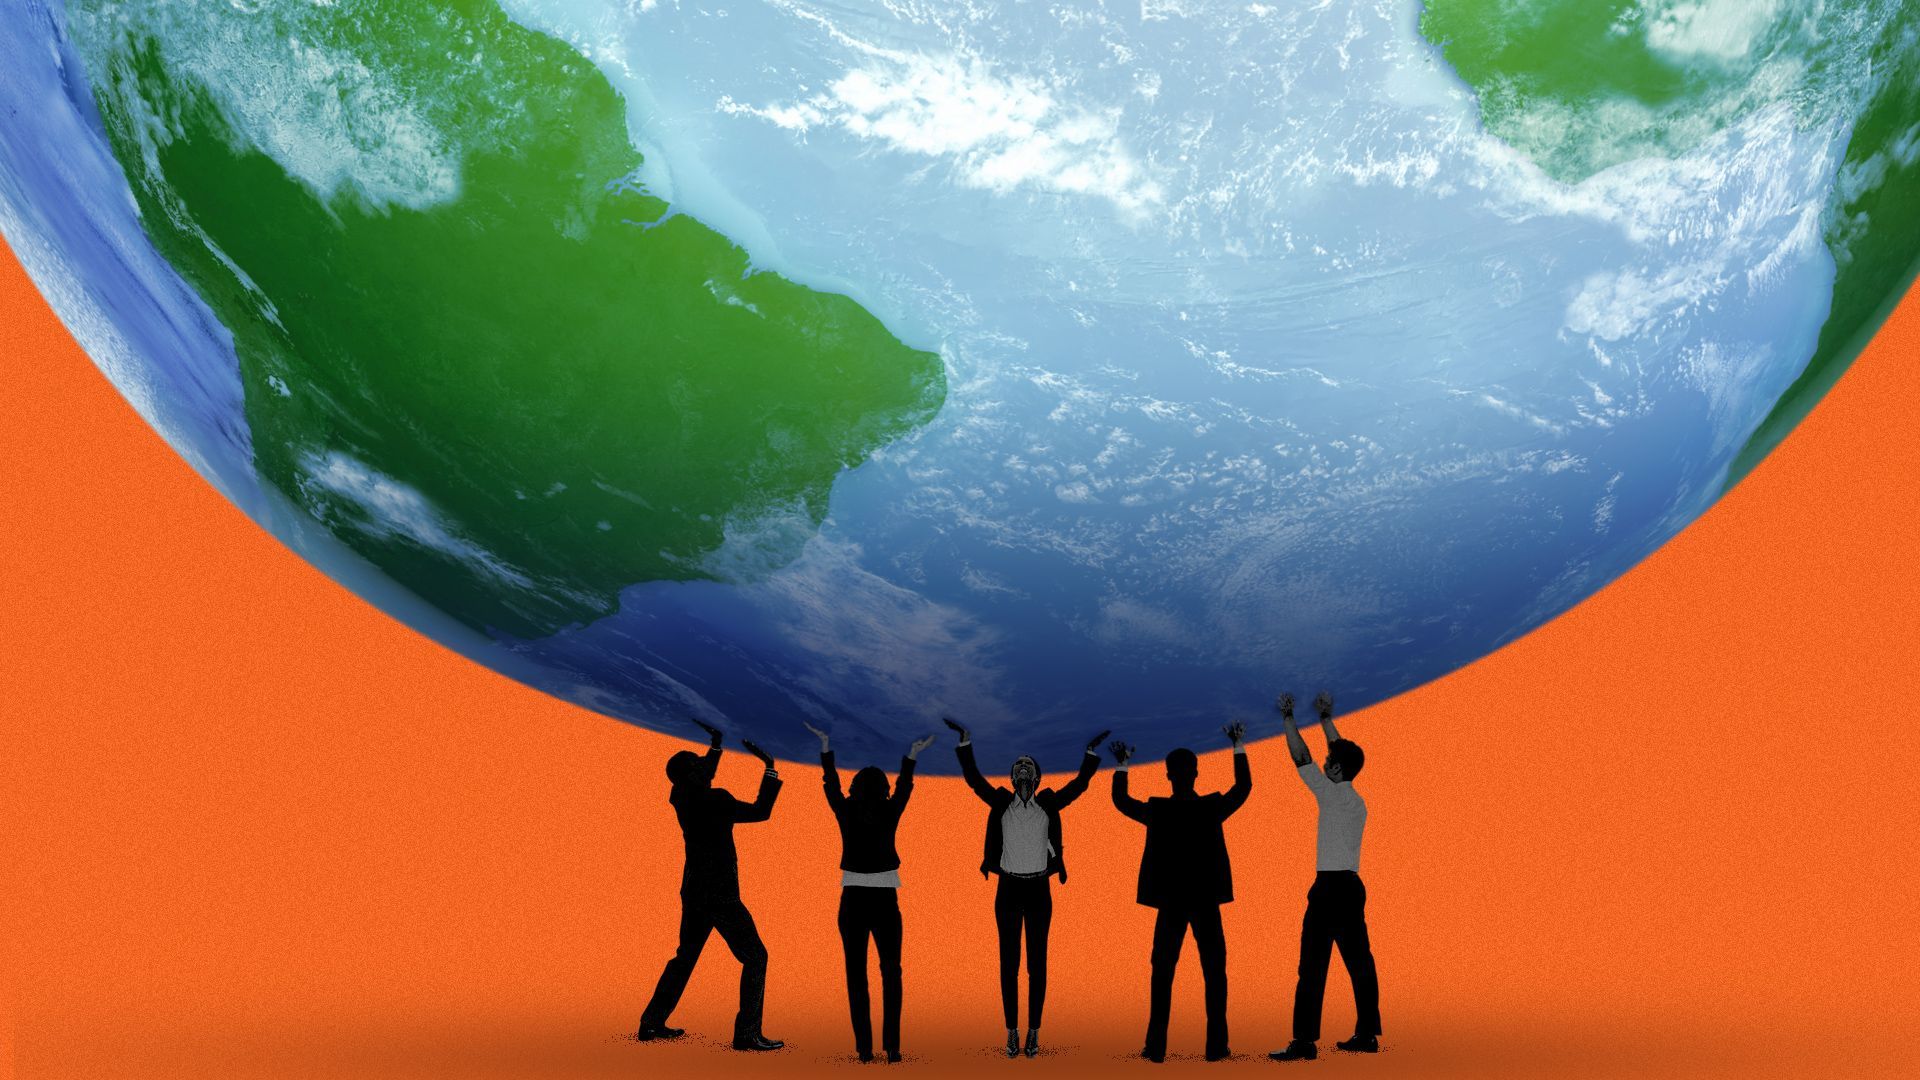 Illustration of a small group of people lifting up a giant Earth.